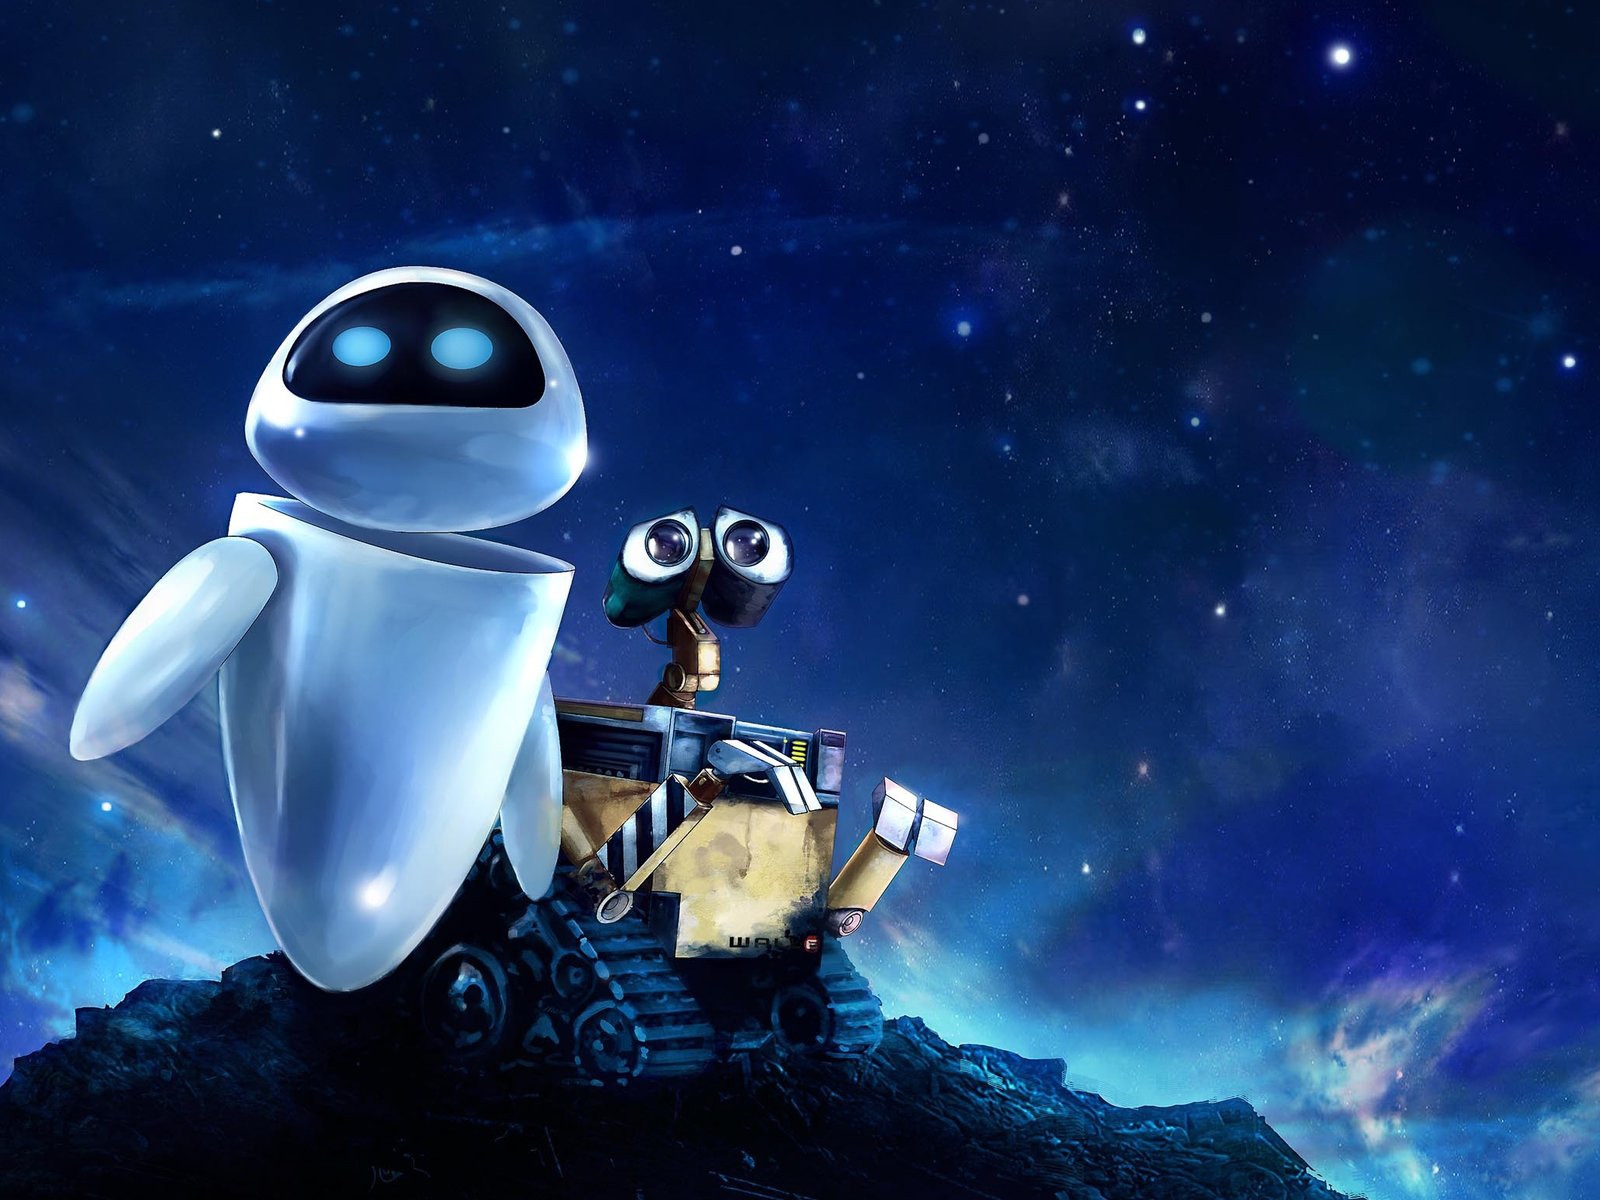 Walle Movie for 1600 x 1200 resolution